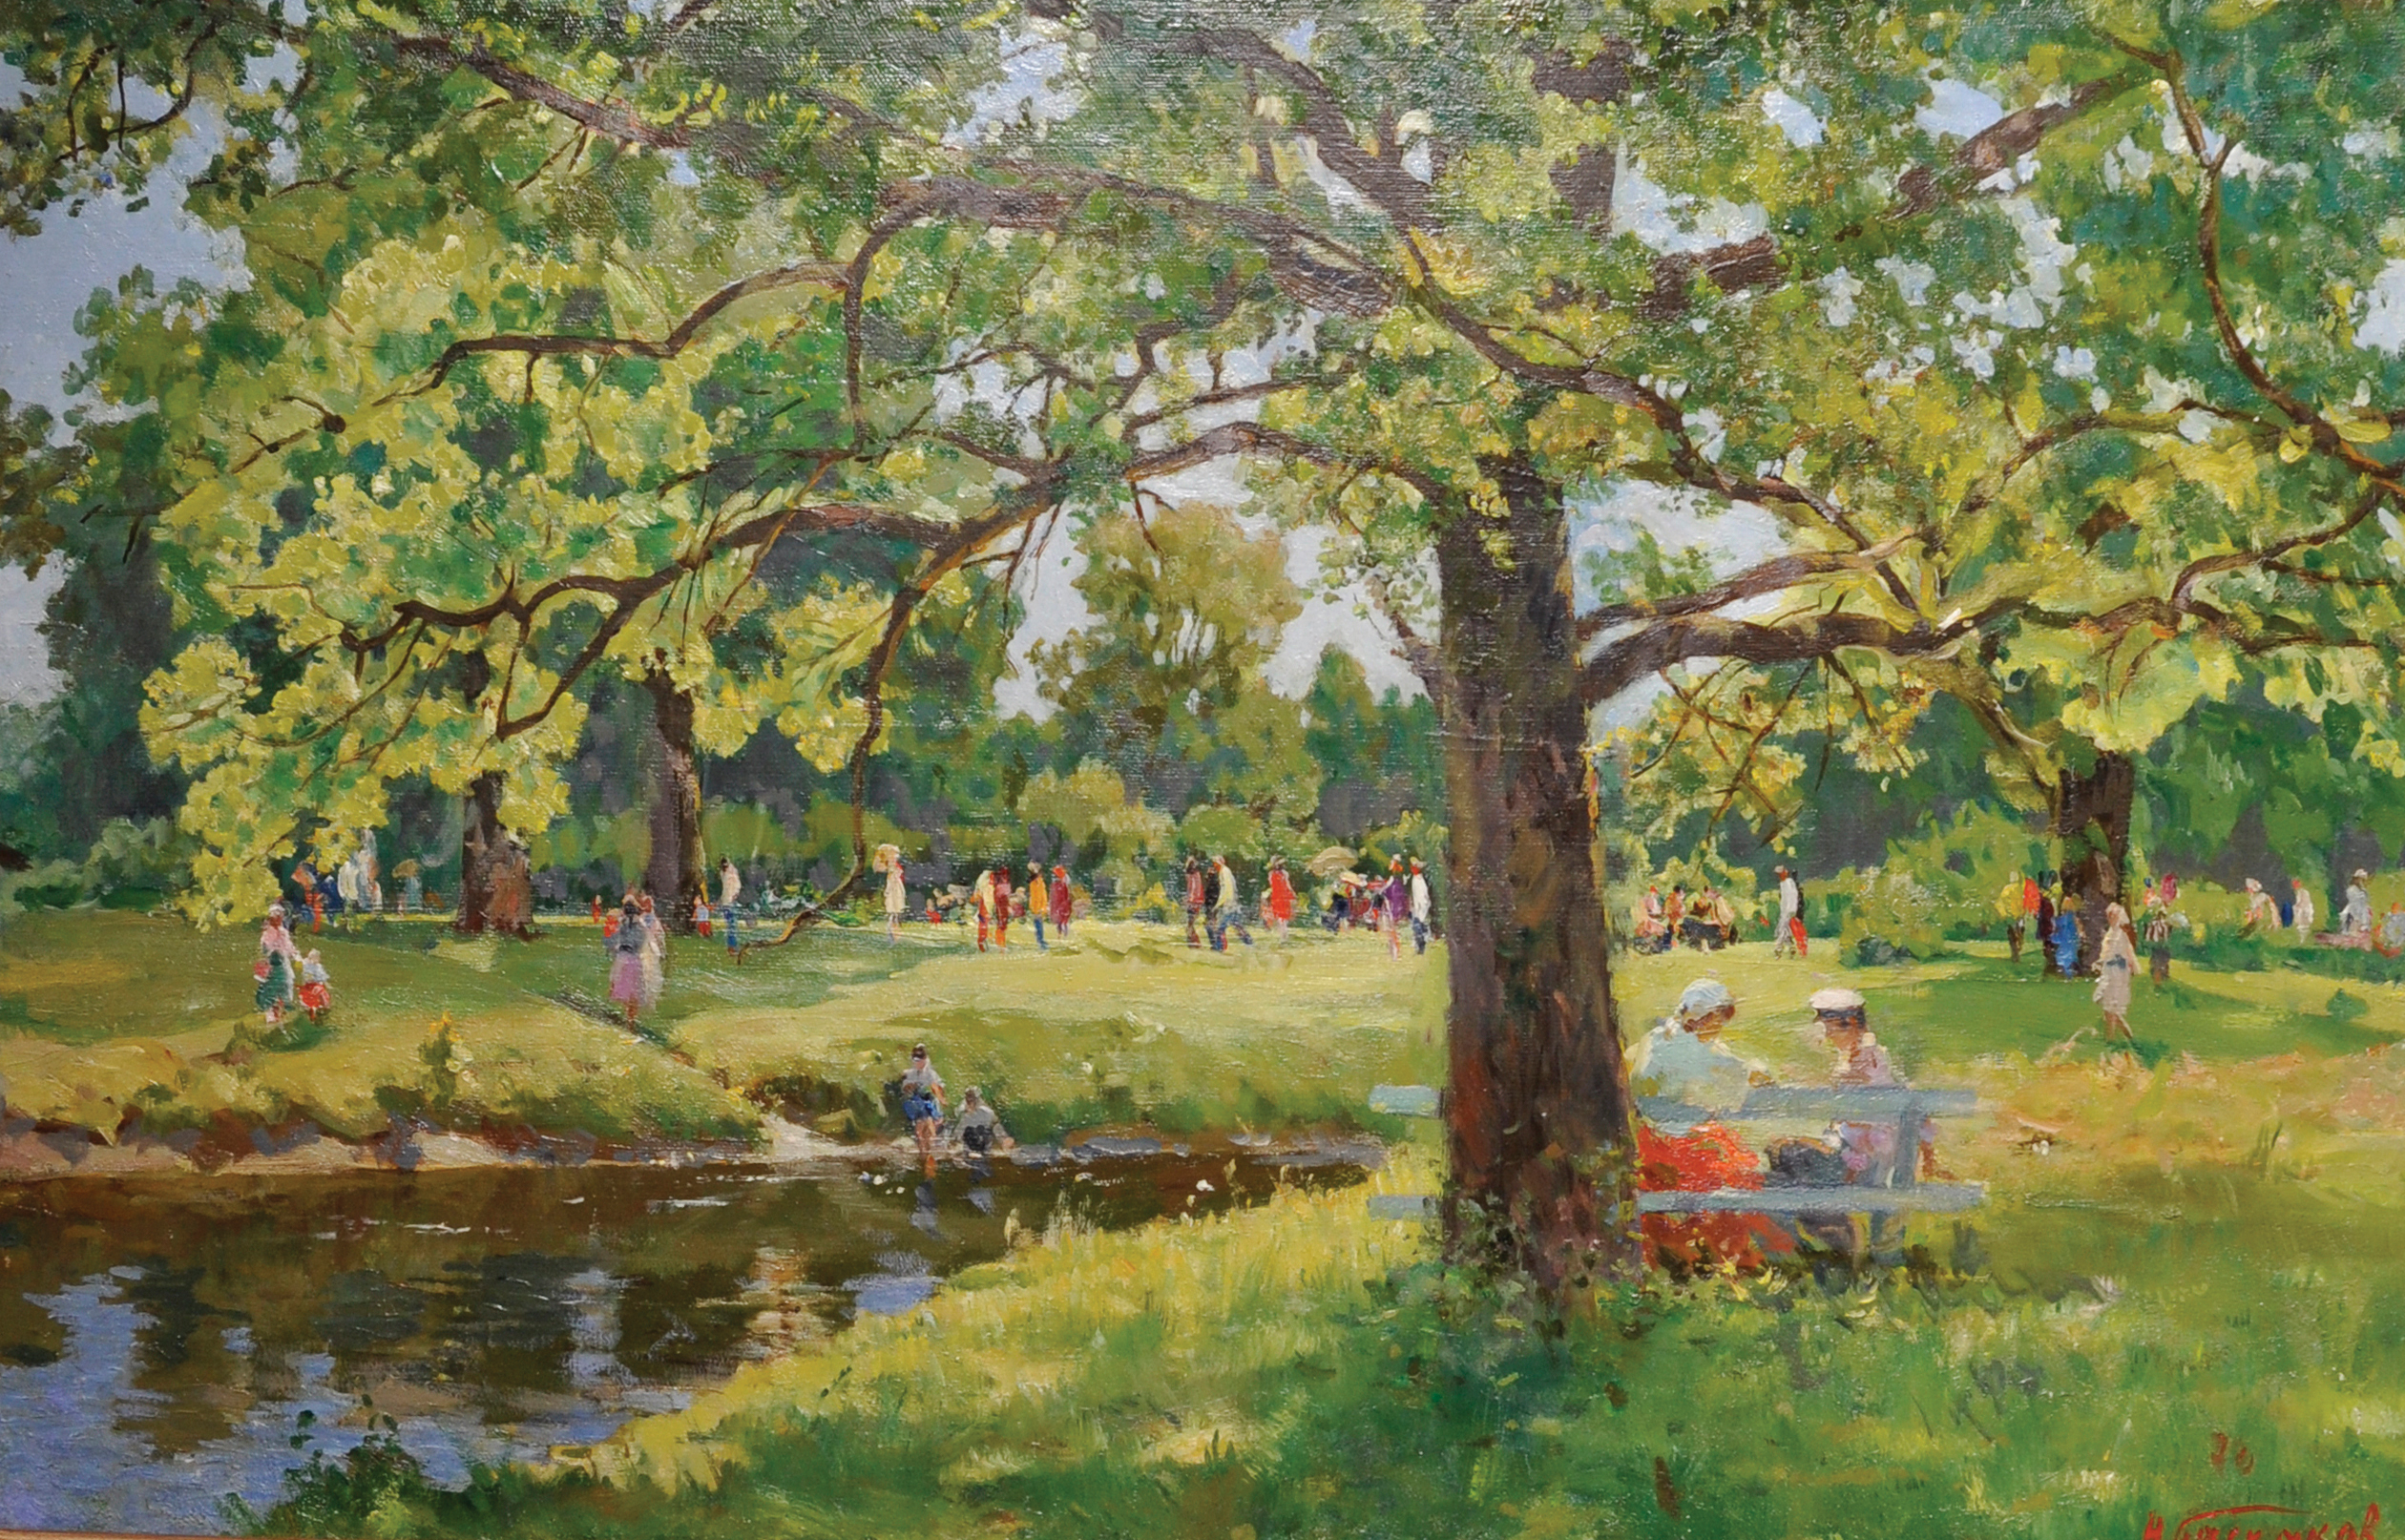 Nikolai Nikolaevitch Baskakov (1918-1993) Russian. "In the Park", with Figures by a River Bank,